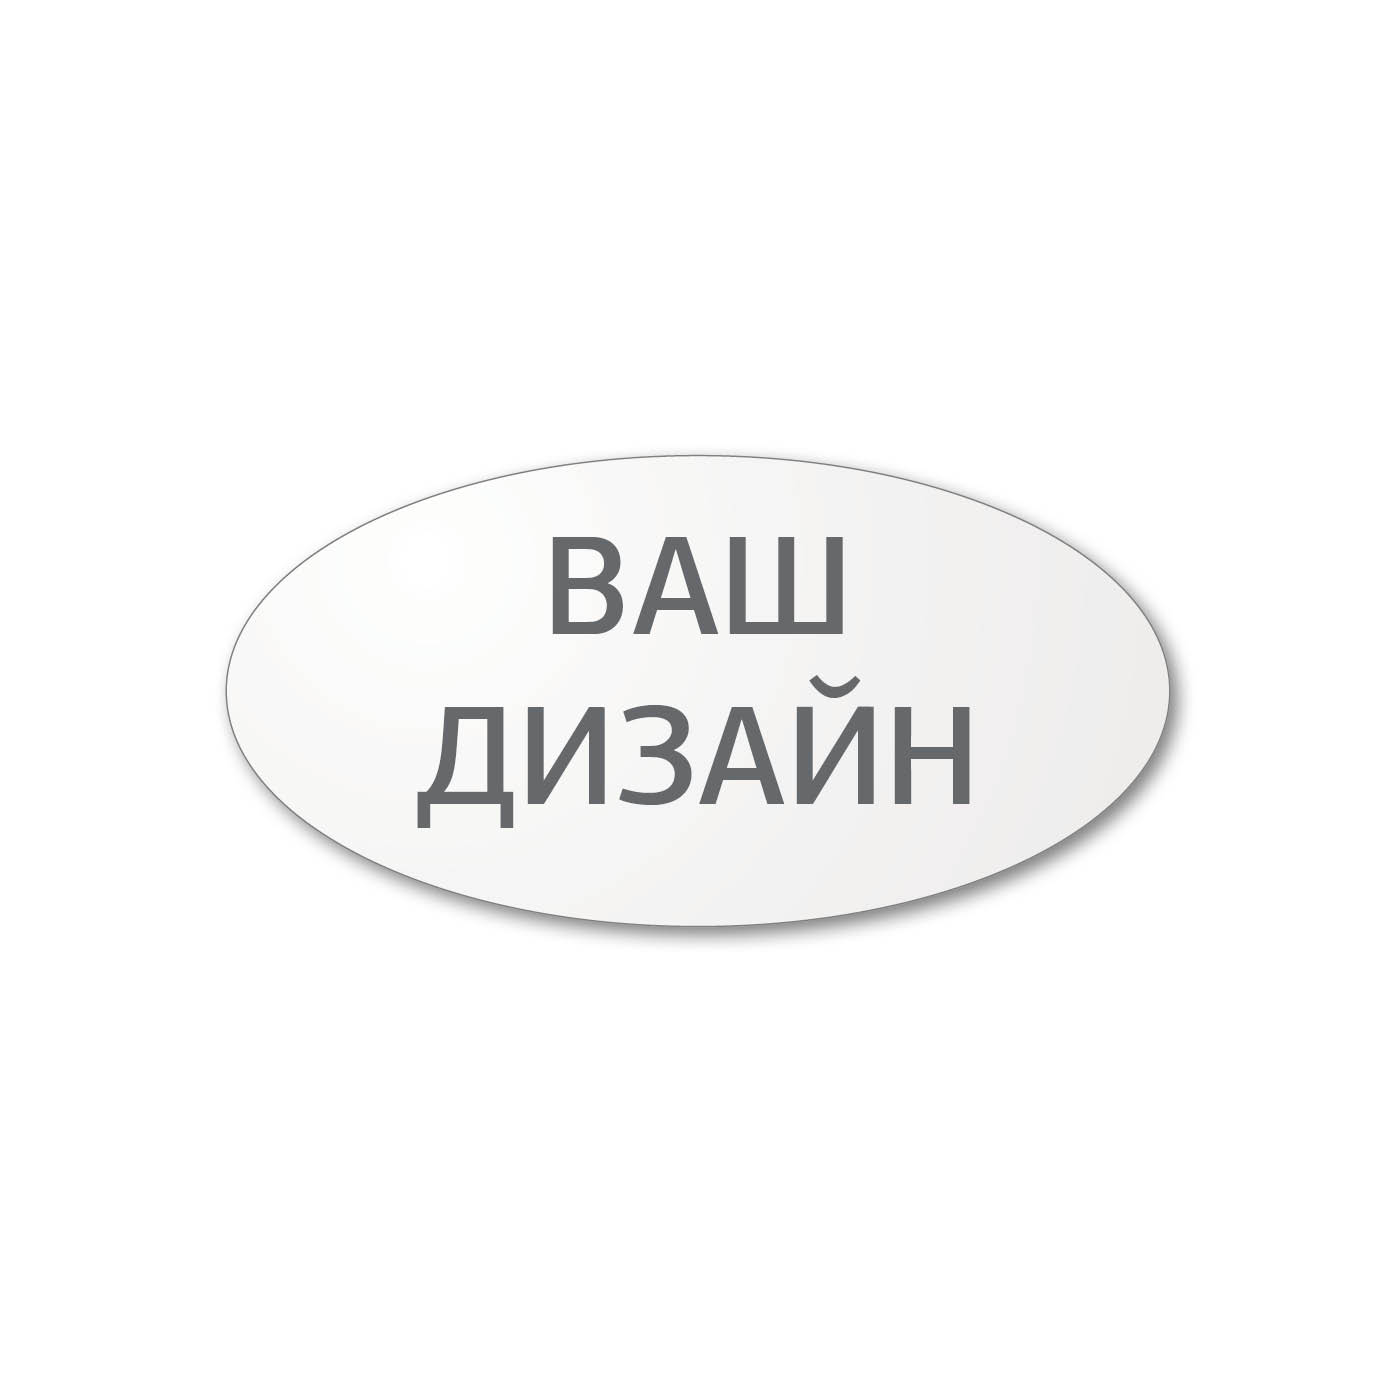 Stickers, oval labels Your design